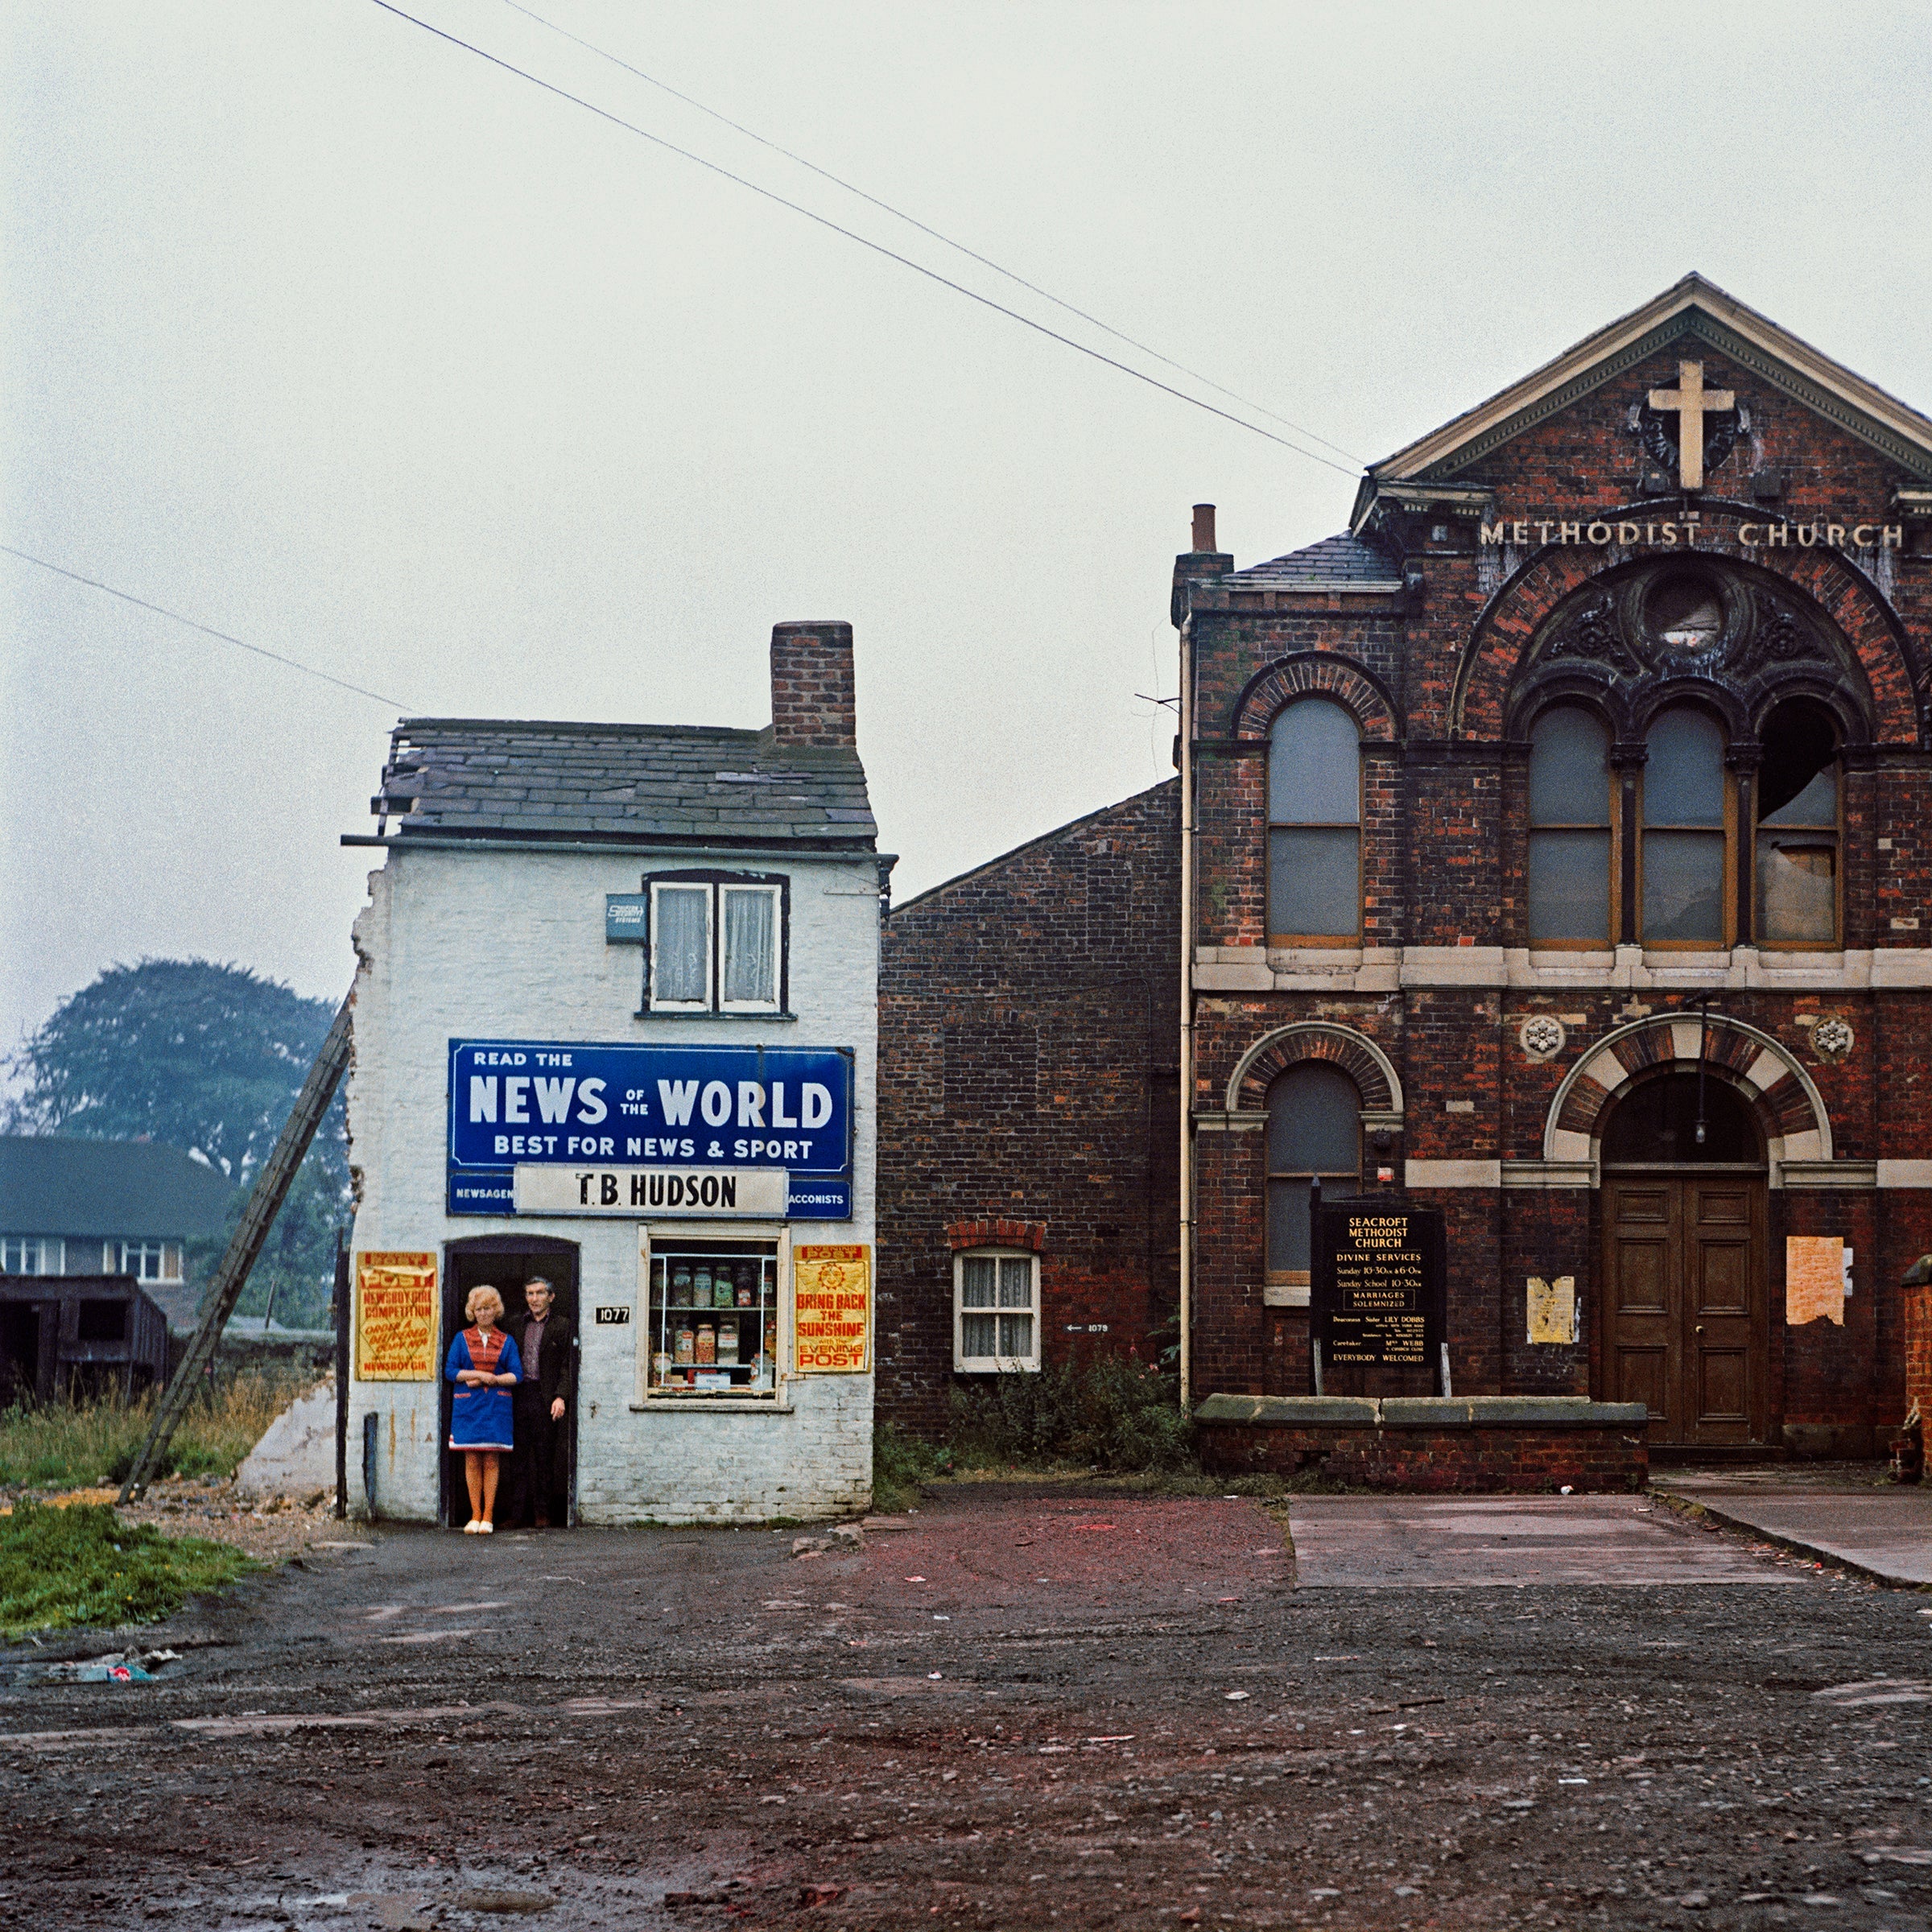 Mr. and Mrs. Hudson, by the old Seacroft Chapel, York Road, Leeds, 1974 - 16x20" Pigment Print